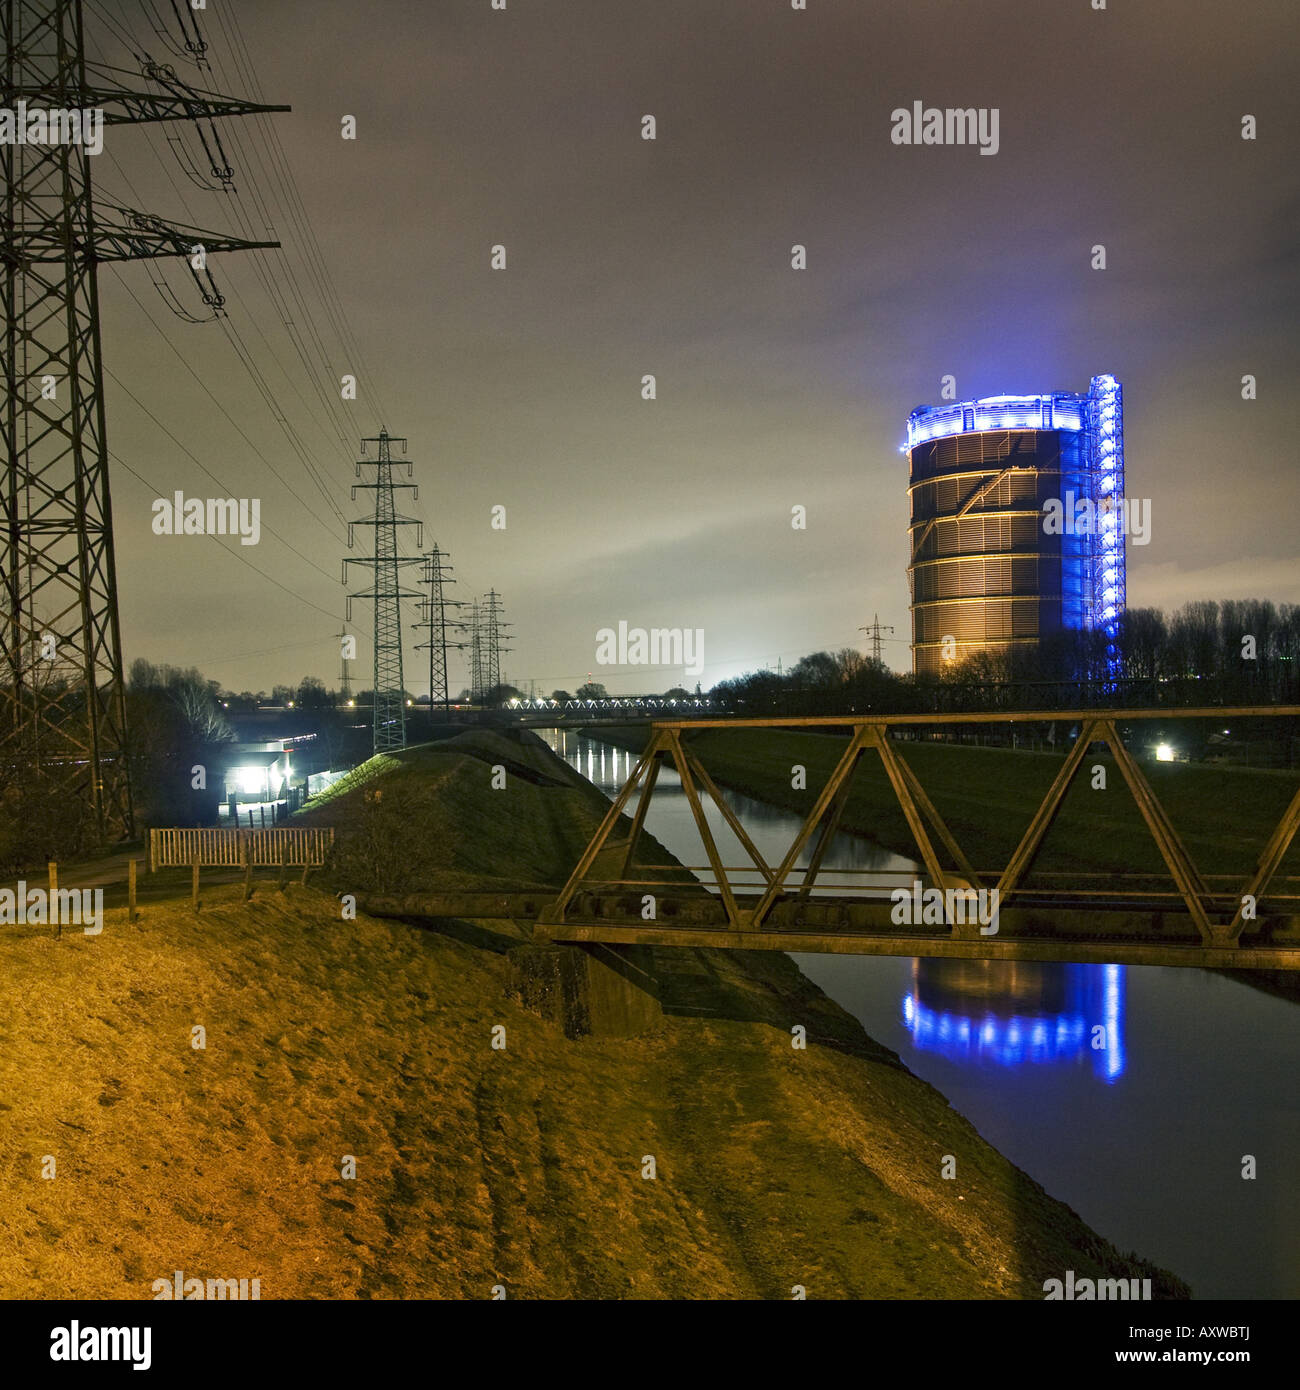 Emscher River with the spectacular illuminated Gasometer at night, Germany, North Rhine-Westphalia, Ruhr Area, Oberhausen Stock Photo